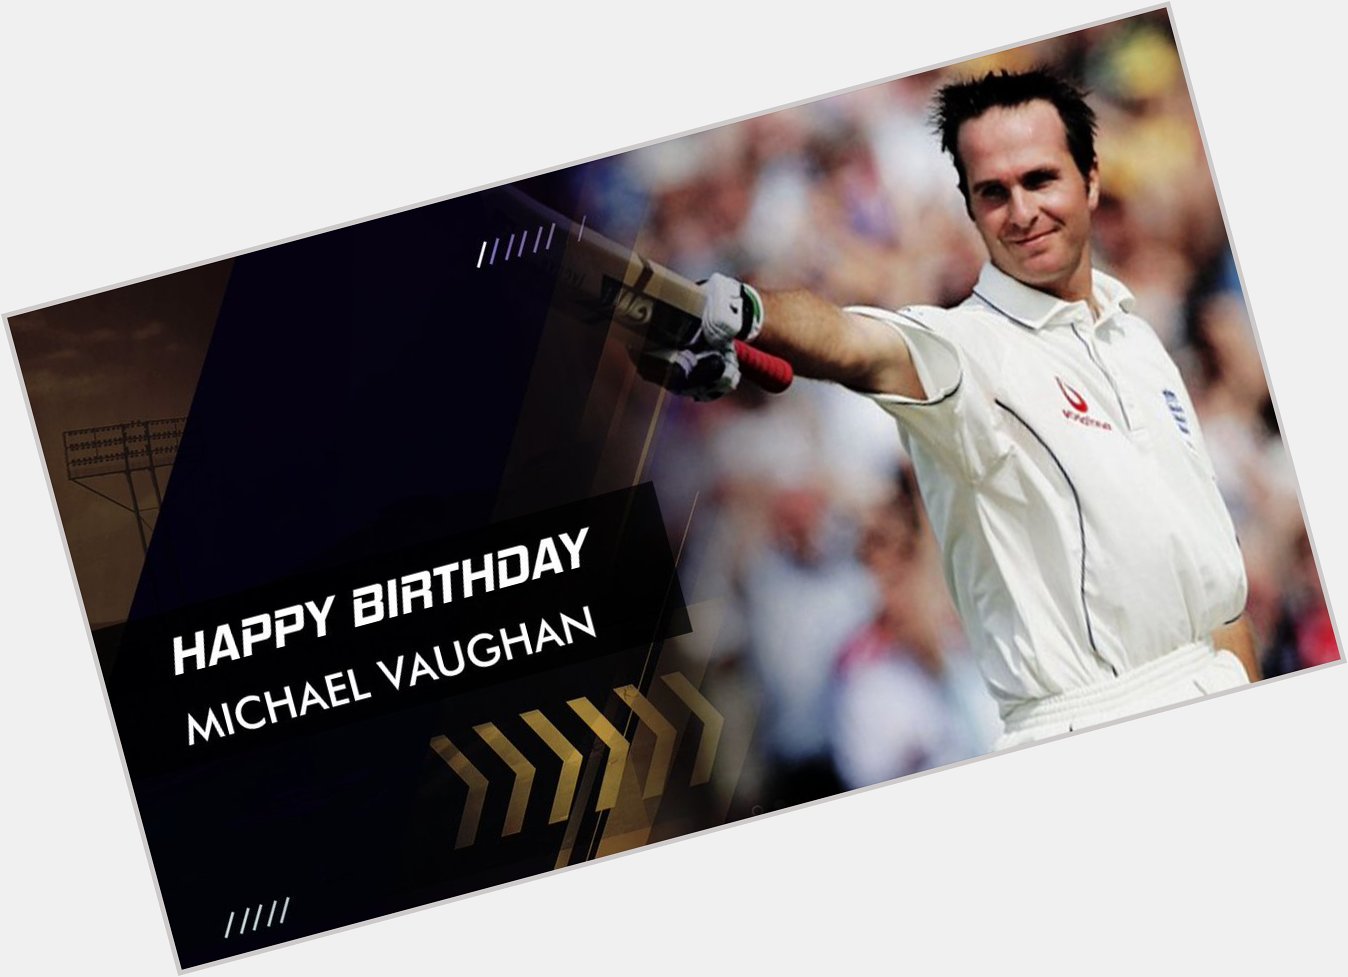 Happy Birthday!! Michael Vaughan

Former England captain and commentator 